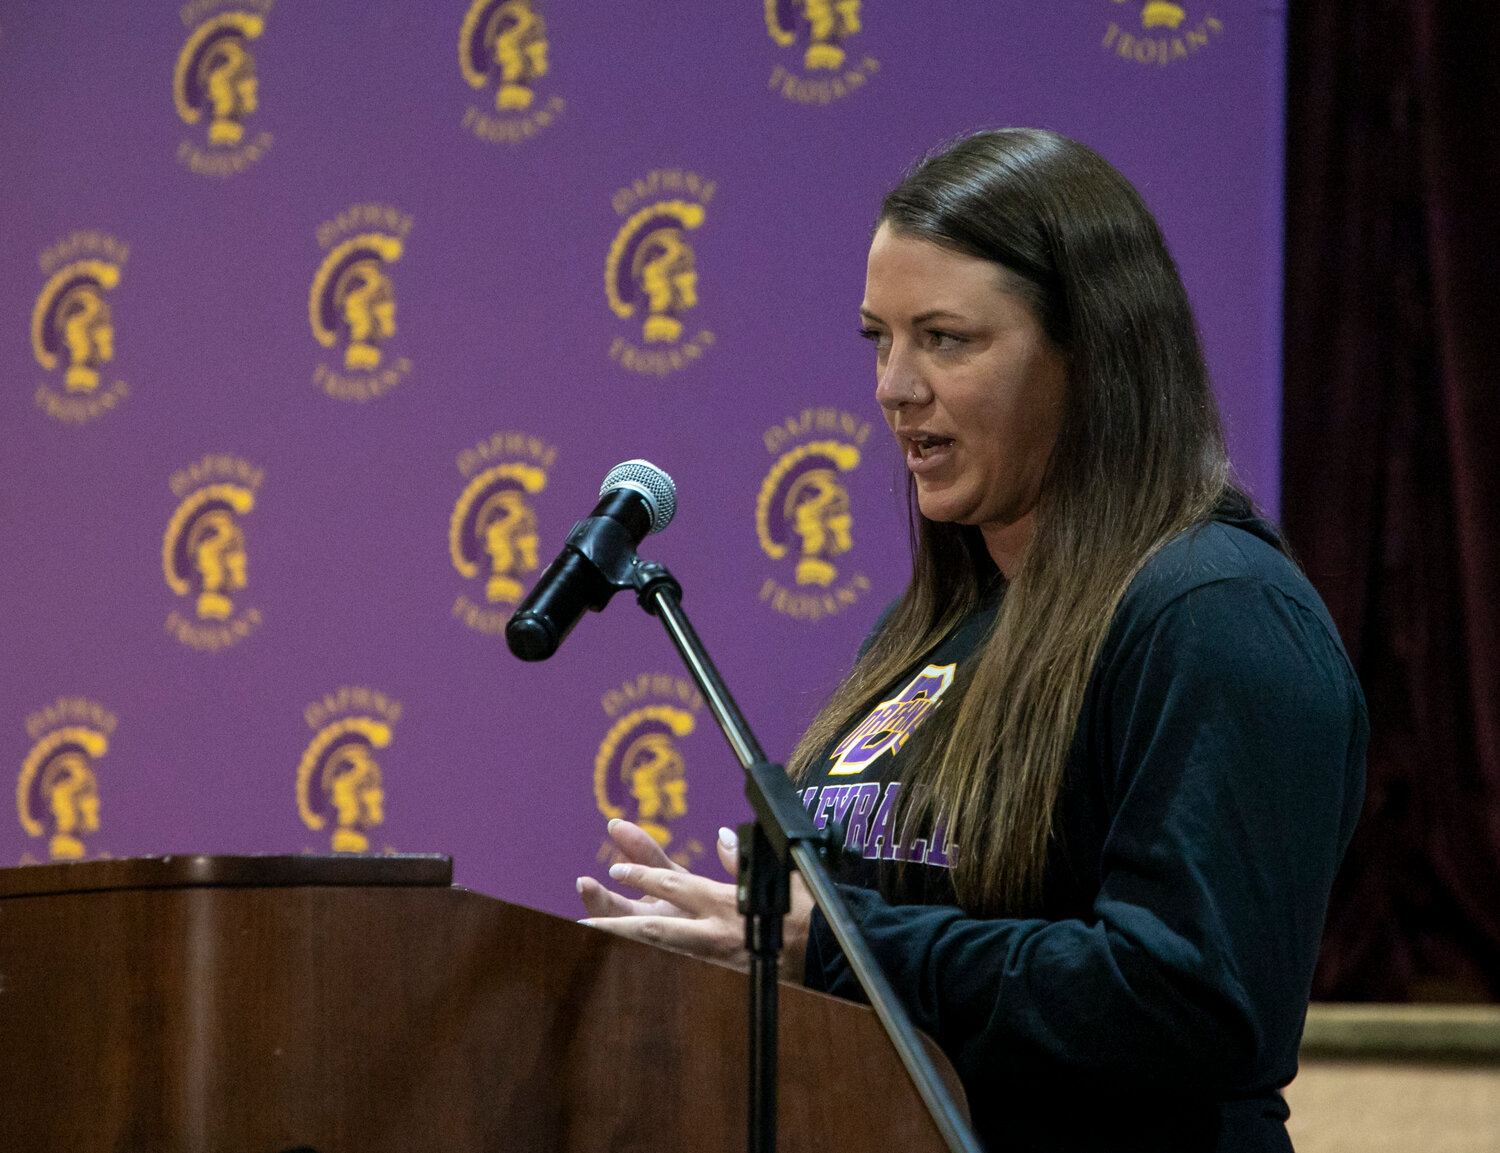 Daphne head coach Casey Craig responds to a question during Monday’s Volleyball Media Day at Trojan Hall. While only three starters return from last year’s team, Craig said a talented crop of underclassmen are ready to take the floor.